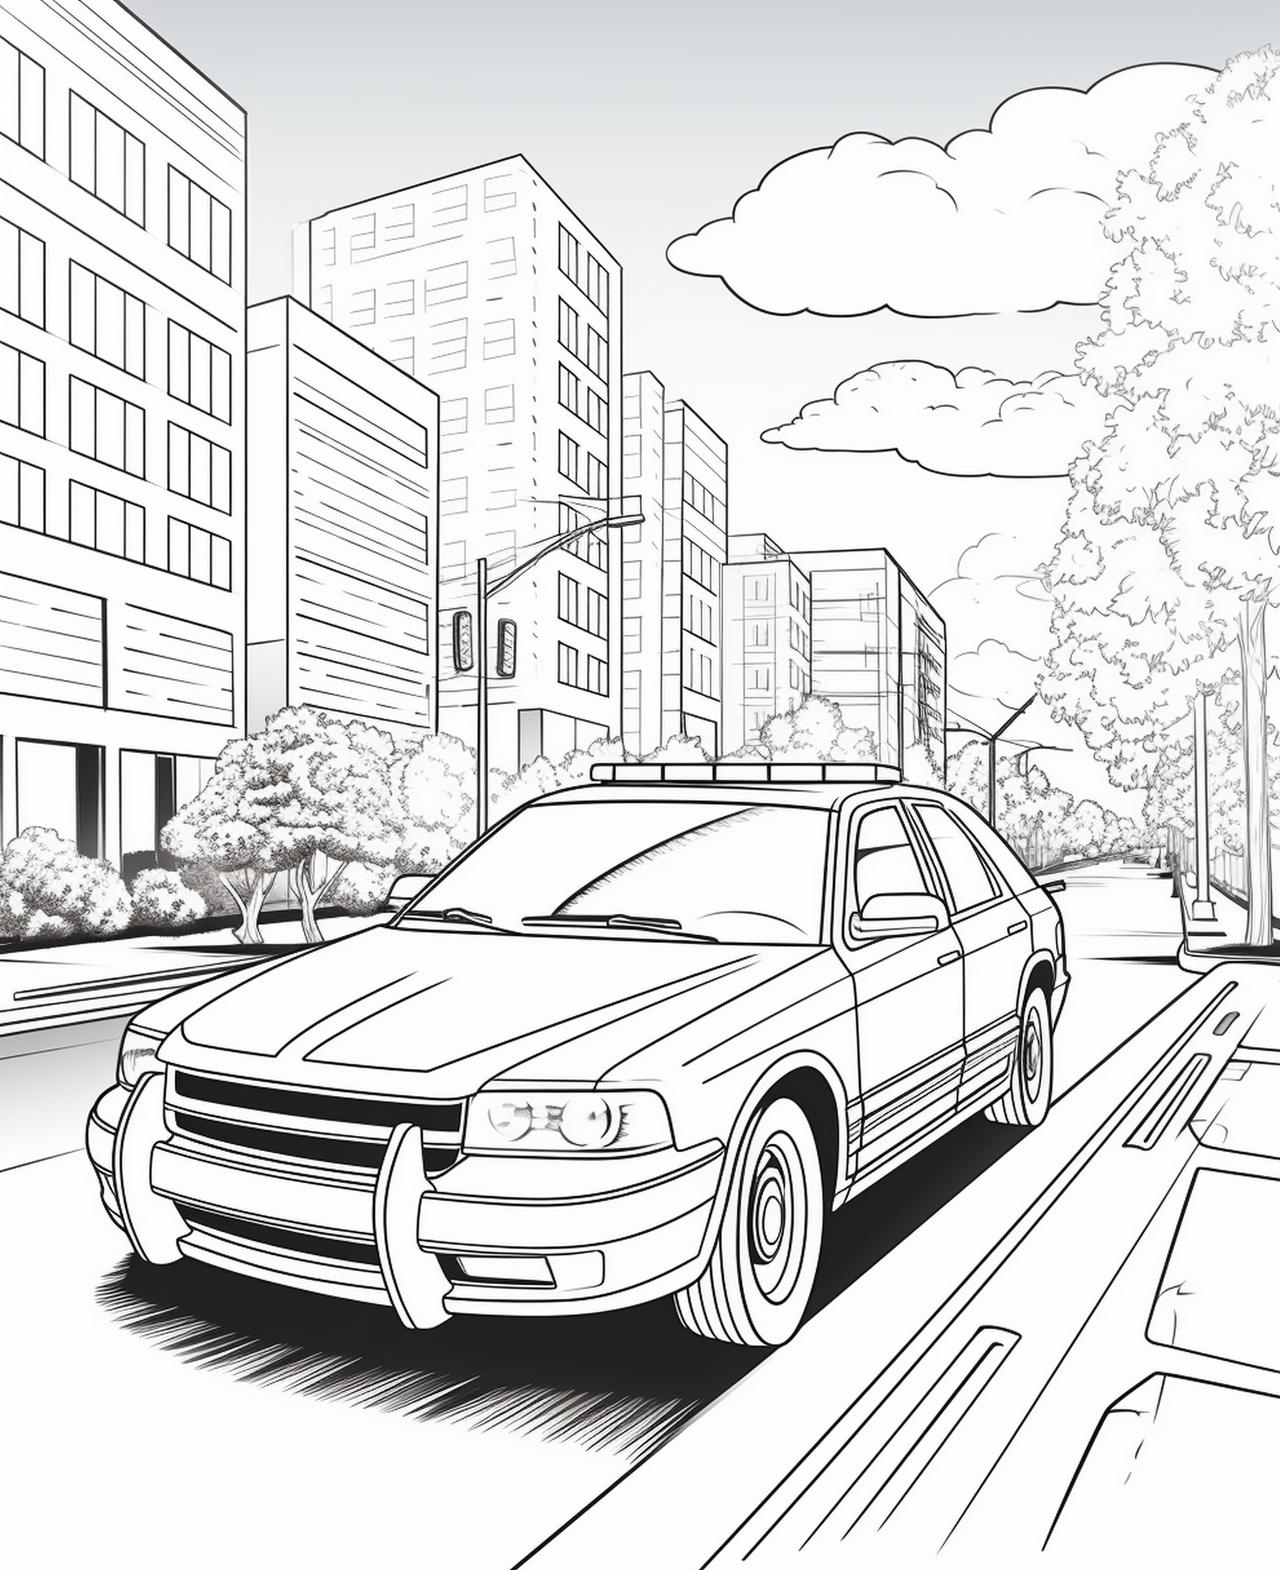 Police cars coloring pages in premium quality by coloringbooksart on